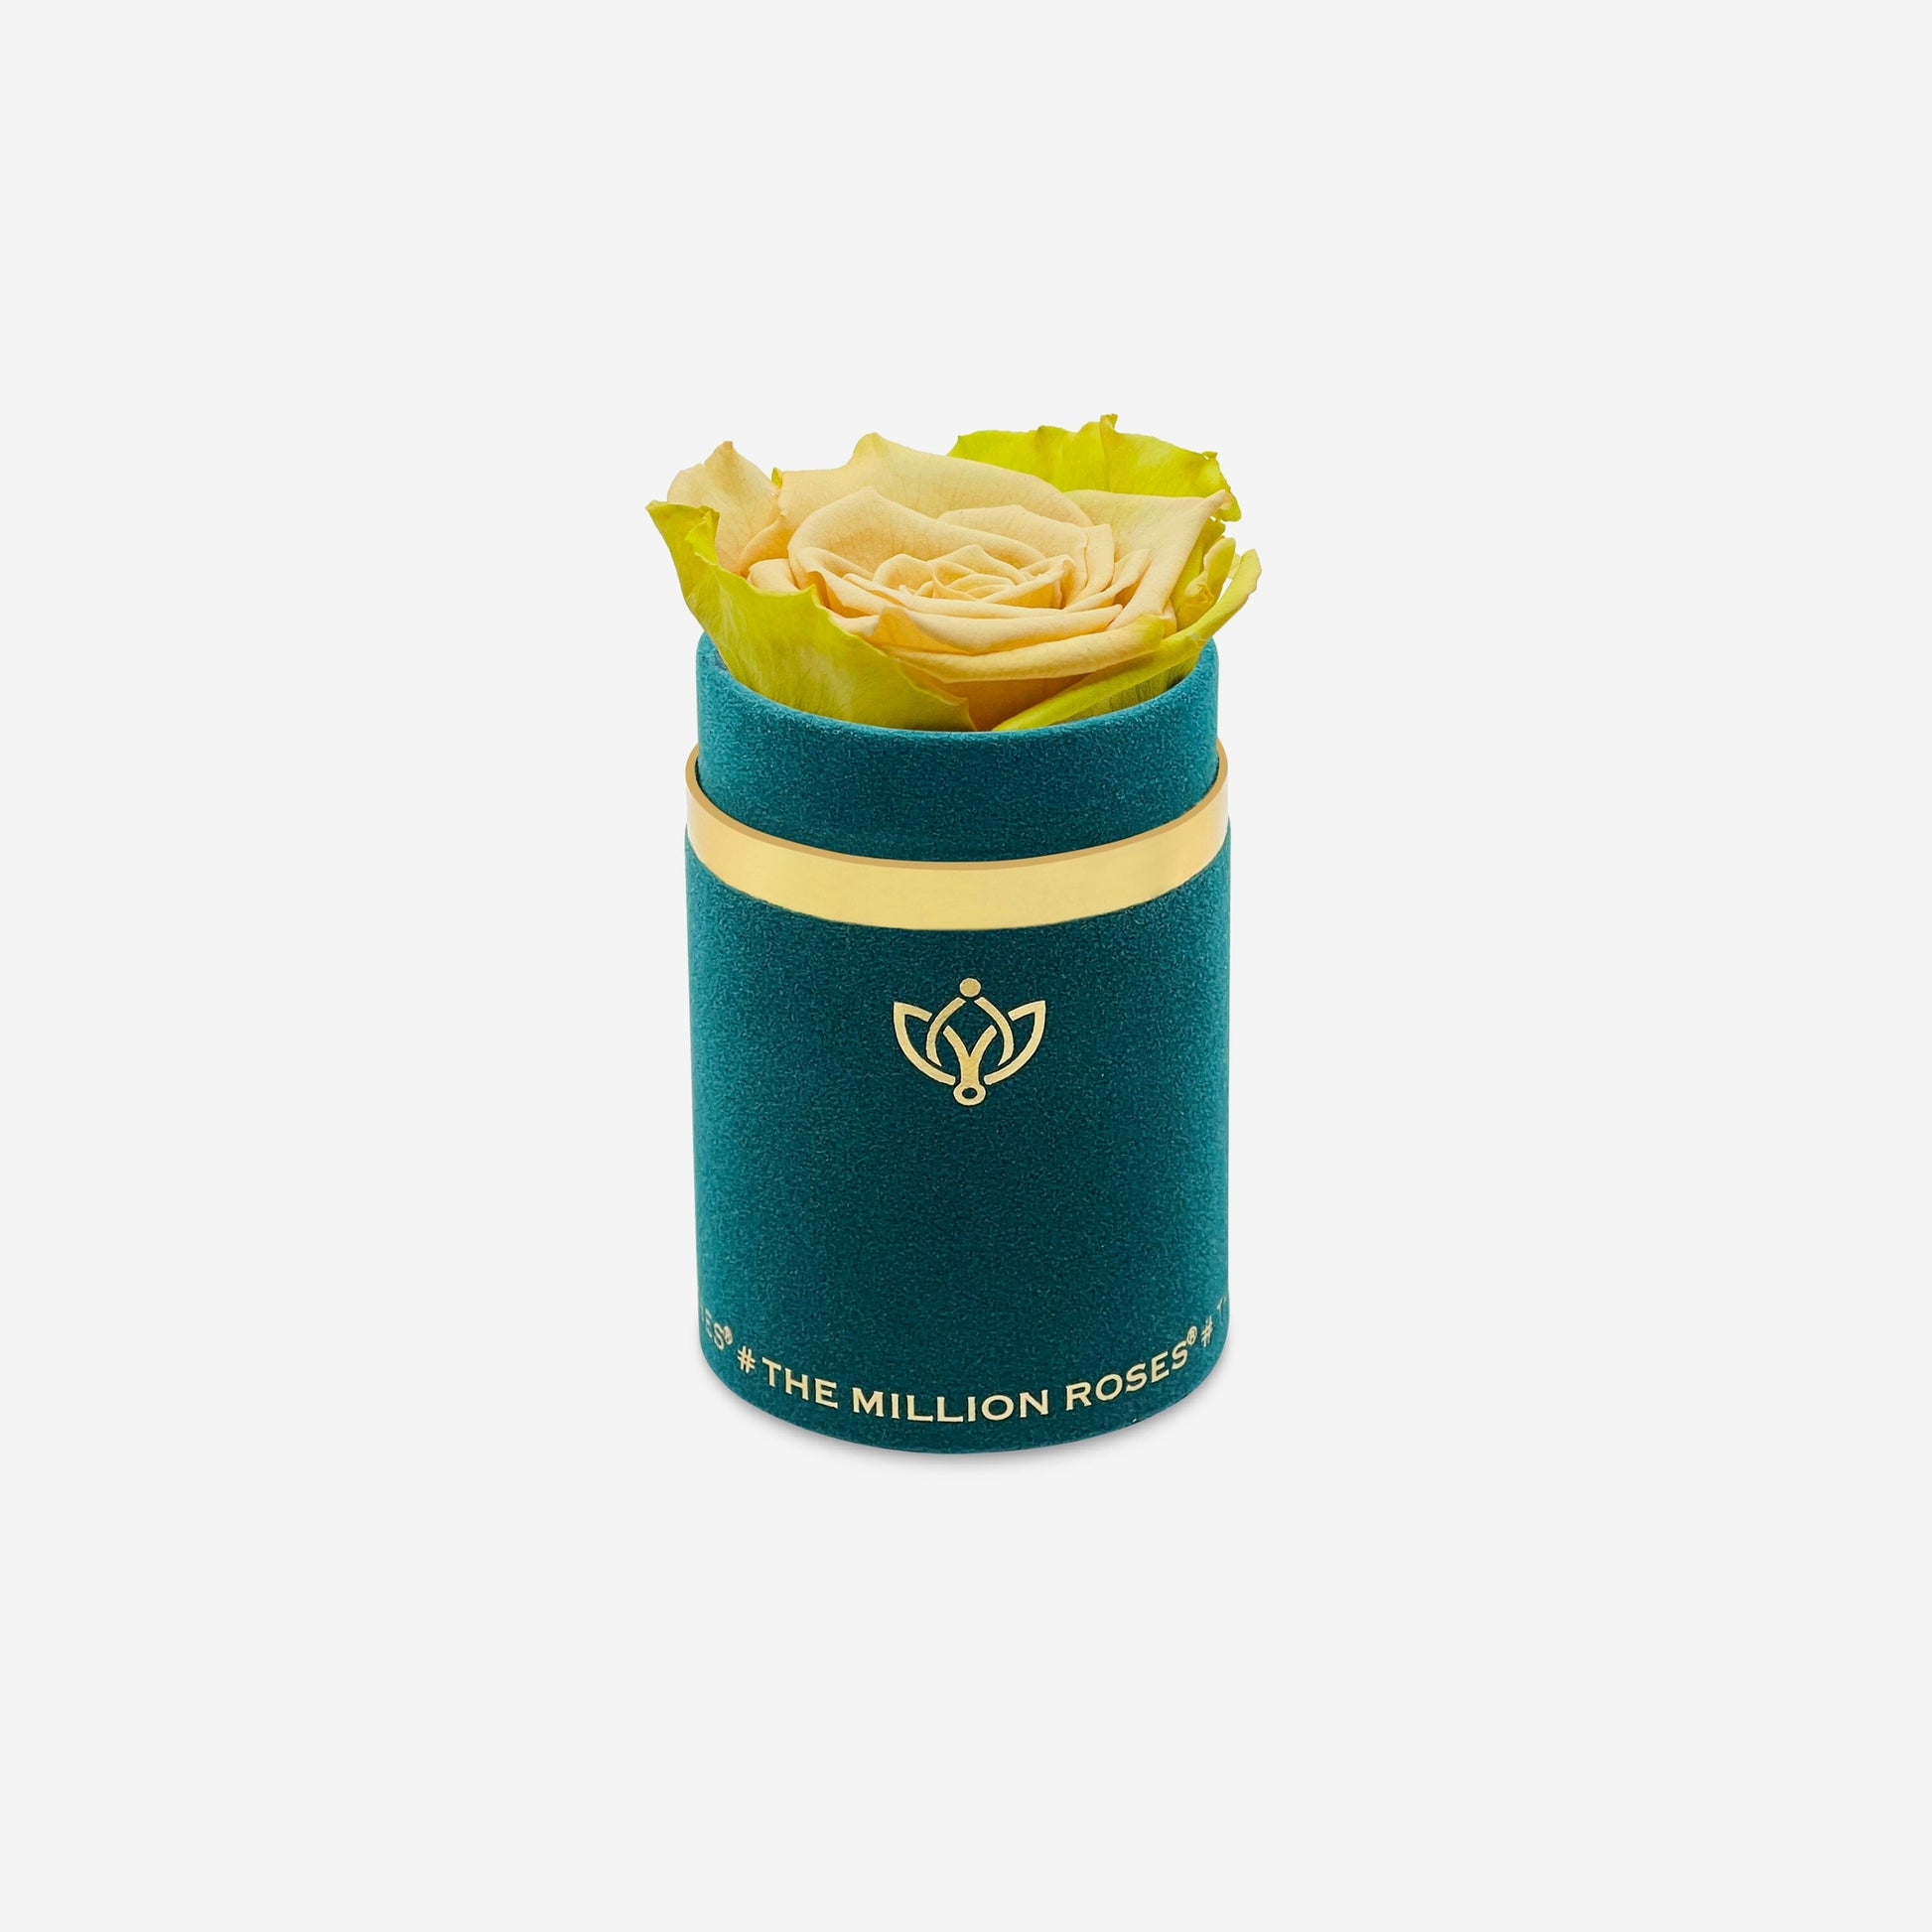 Single Dark Green Suede Box | Fawn Bicolor Rose - The Million Roses